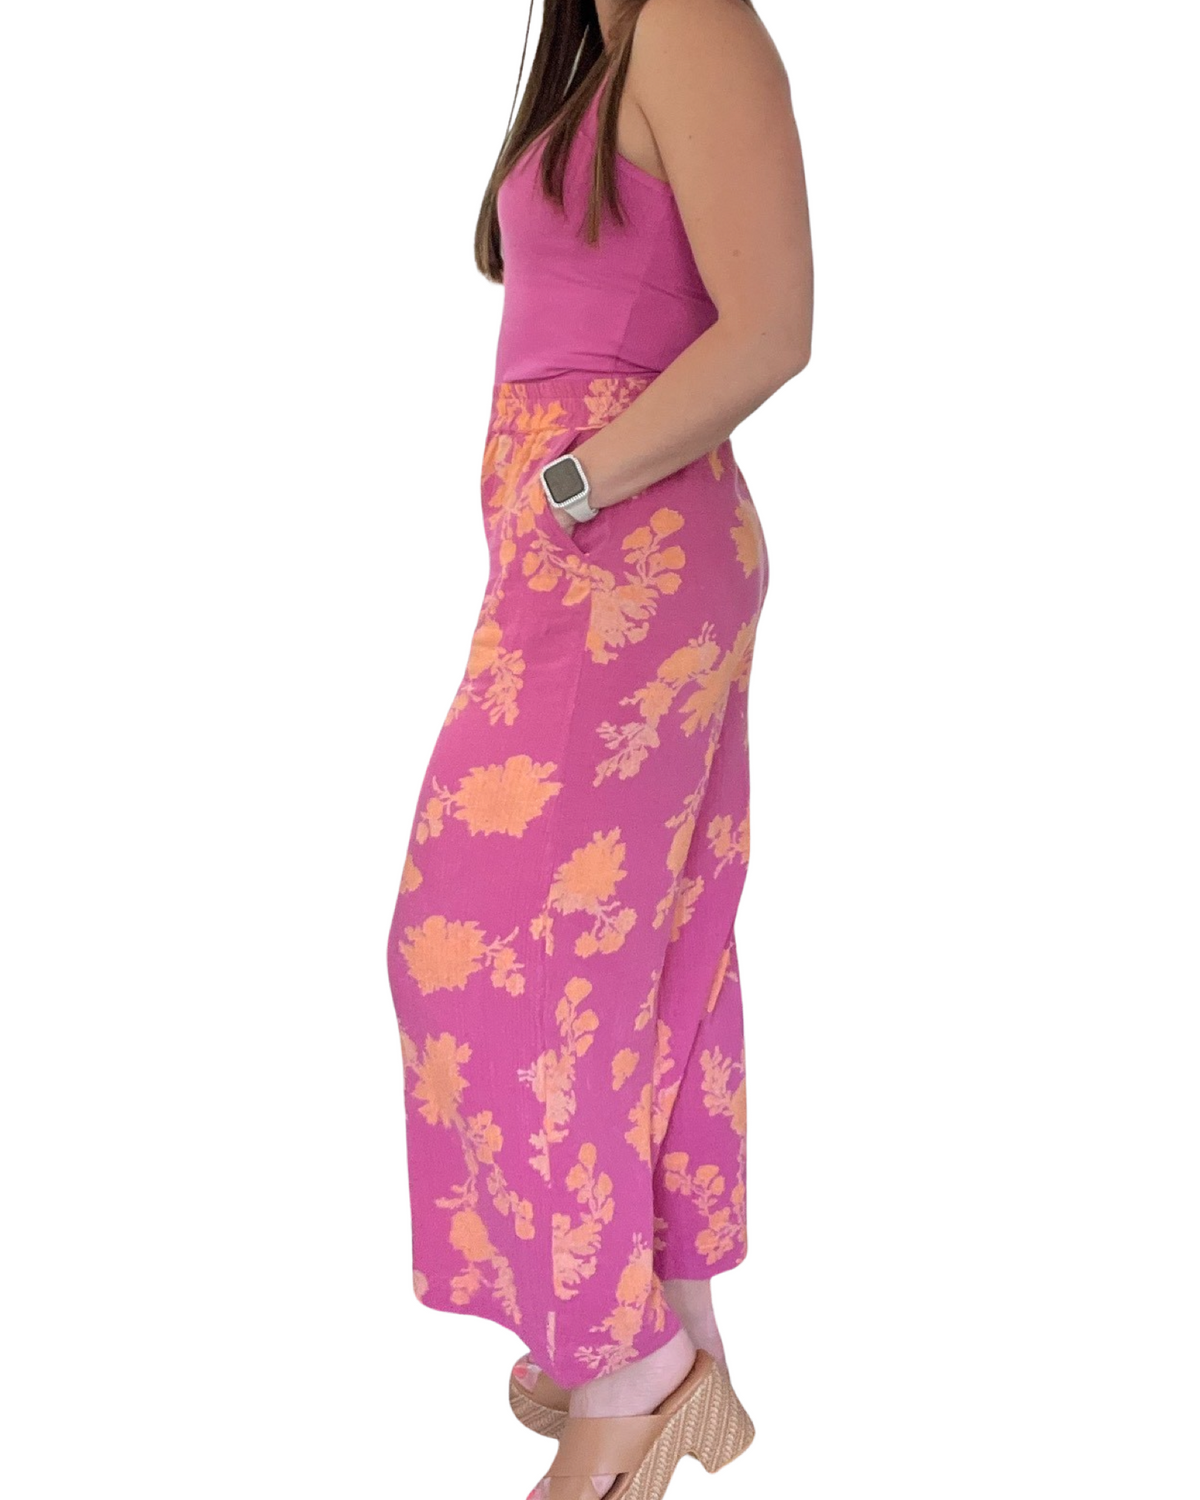 Monte Sunshine Floral Pant in Raspberry Sorbet